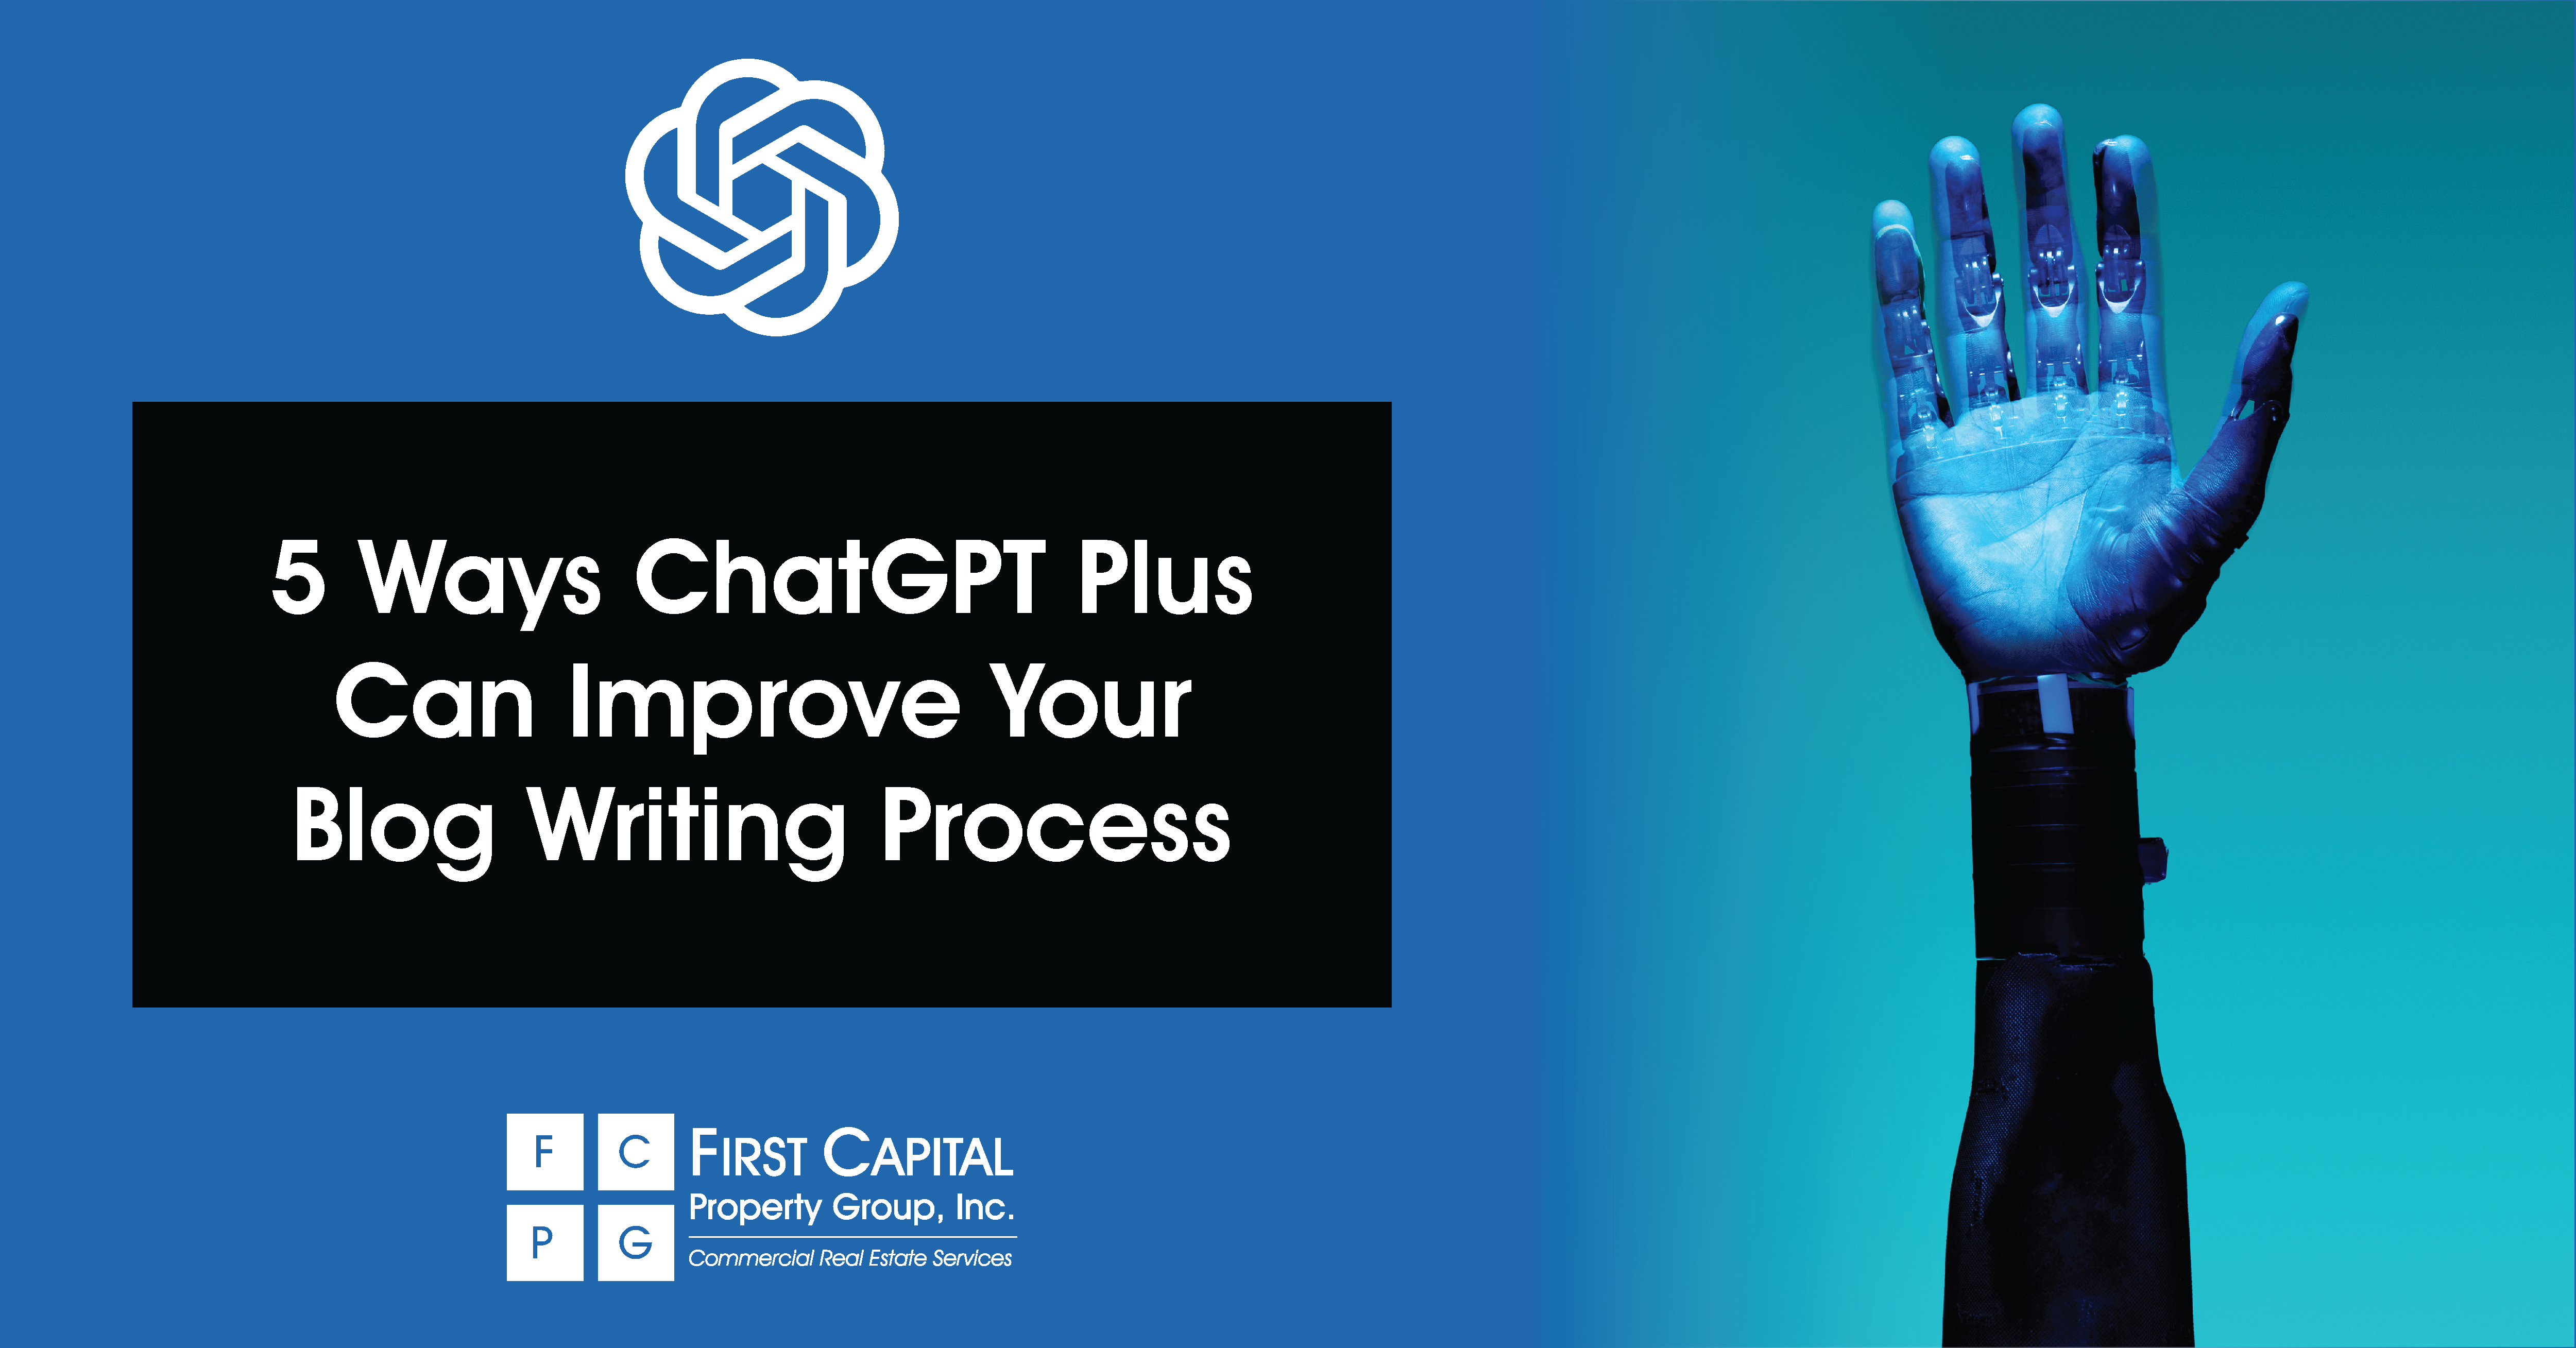 ChatGPT Plsu helps with Blog writing Process